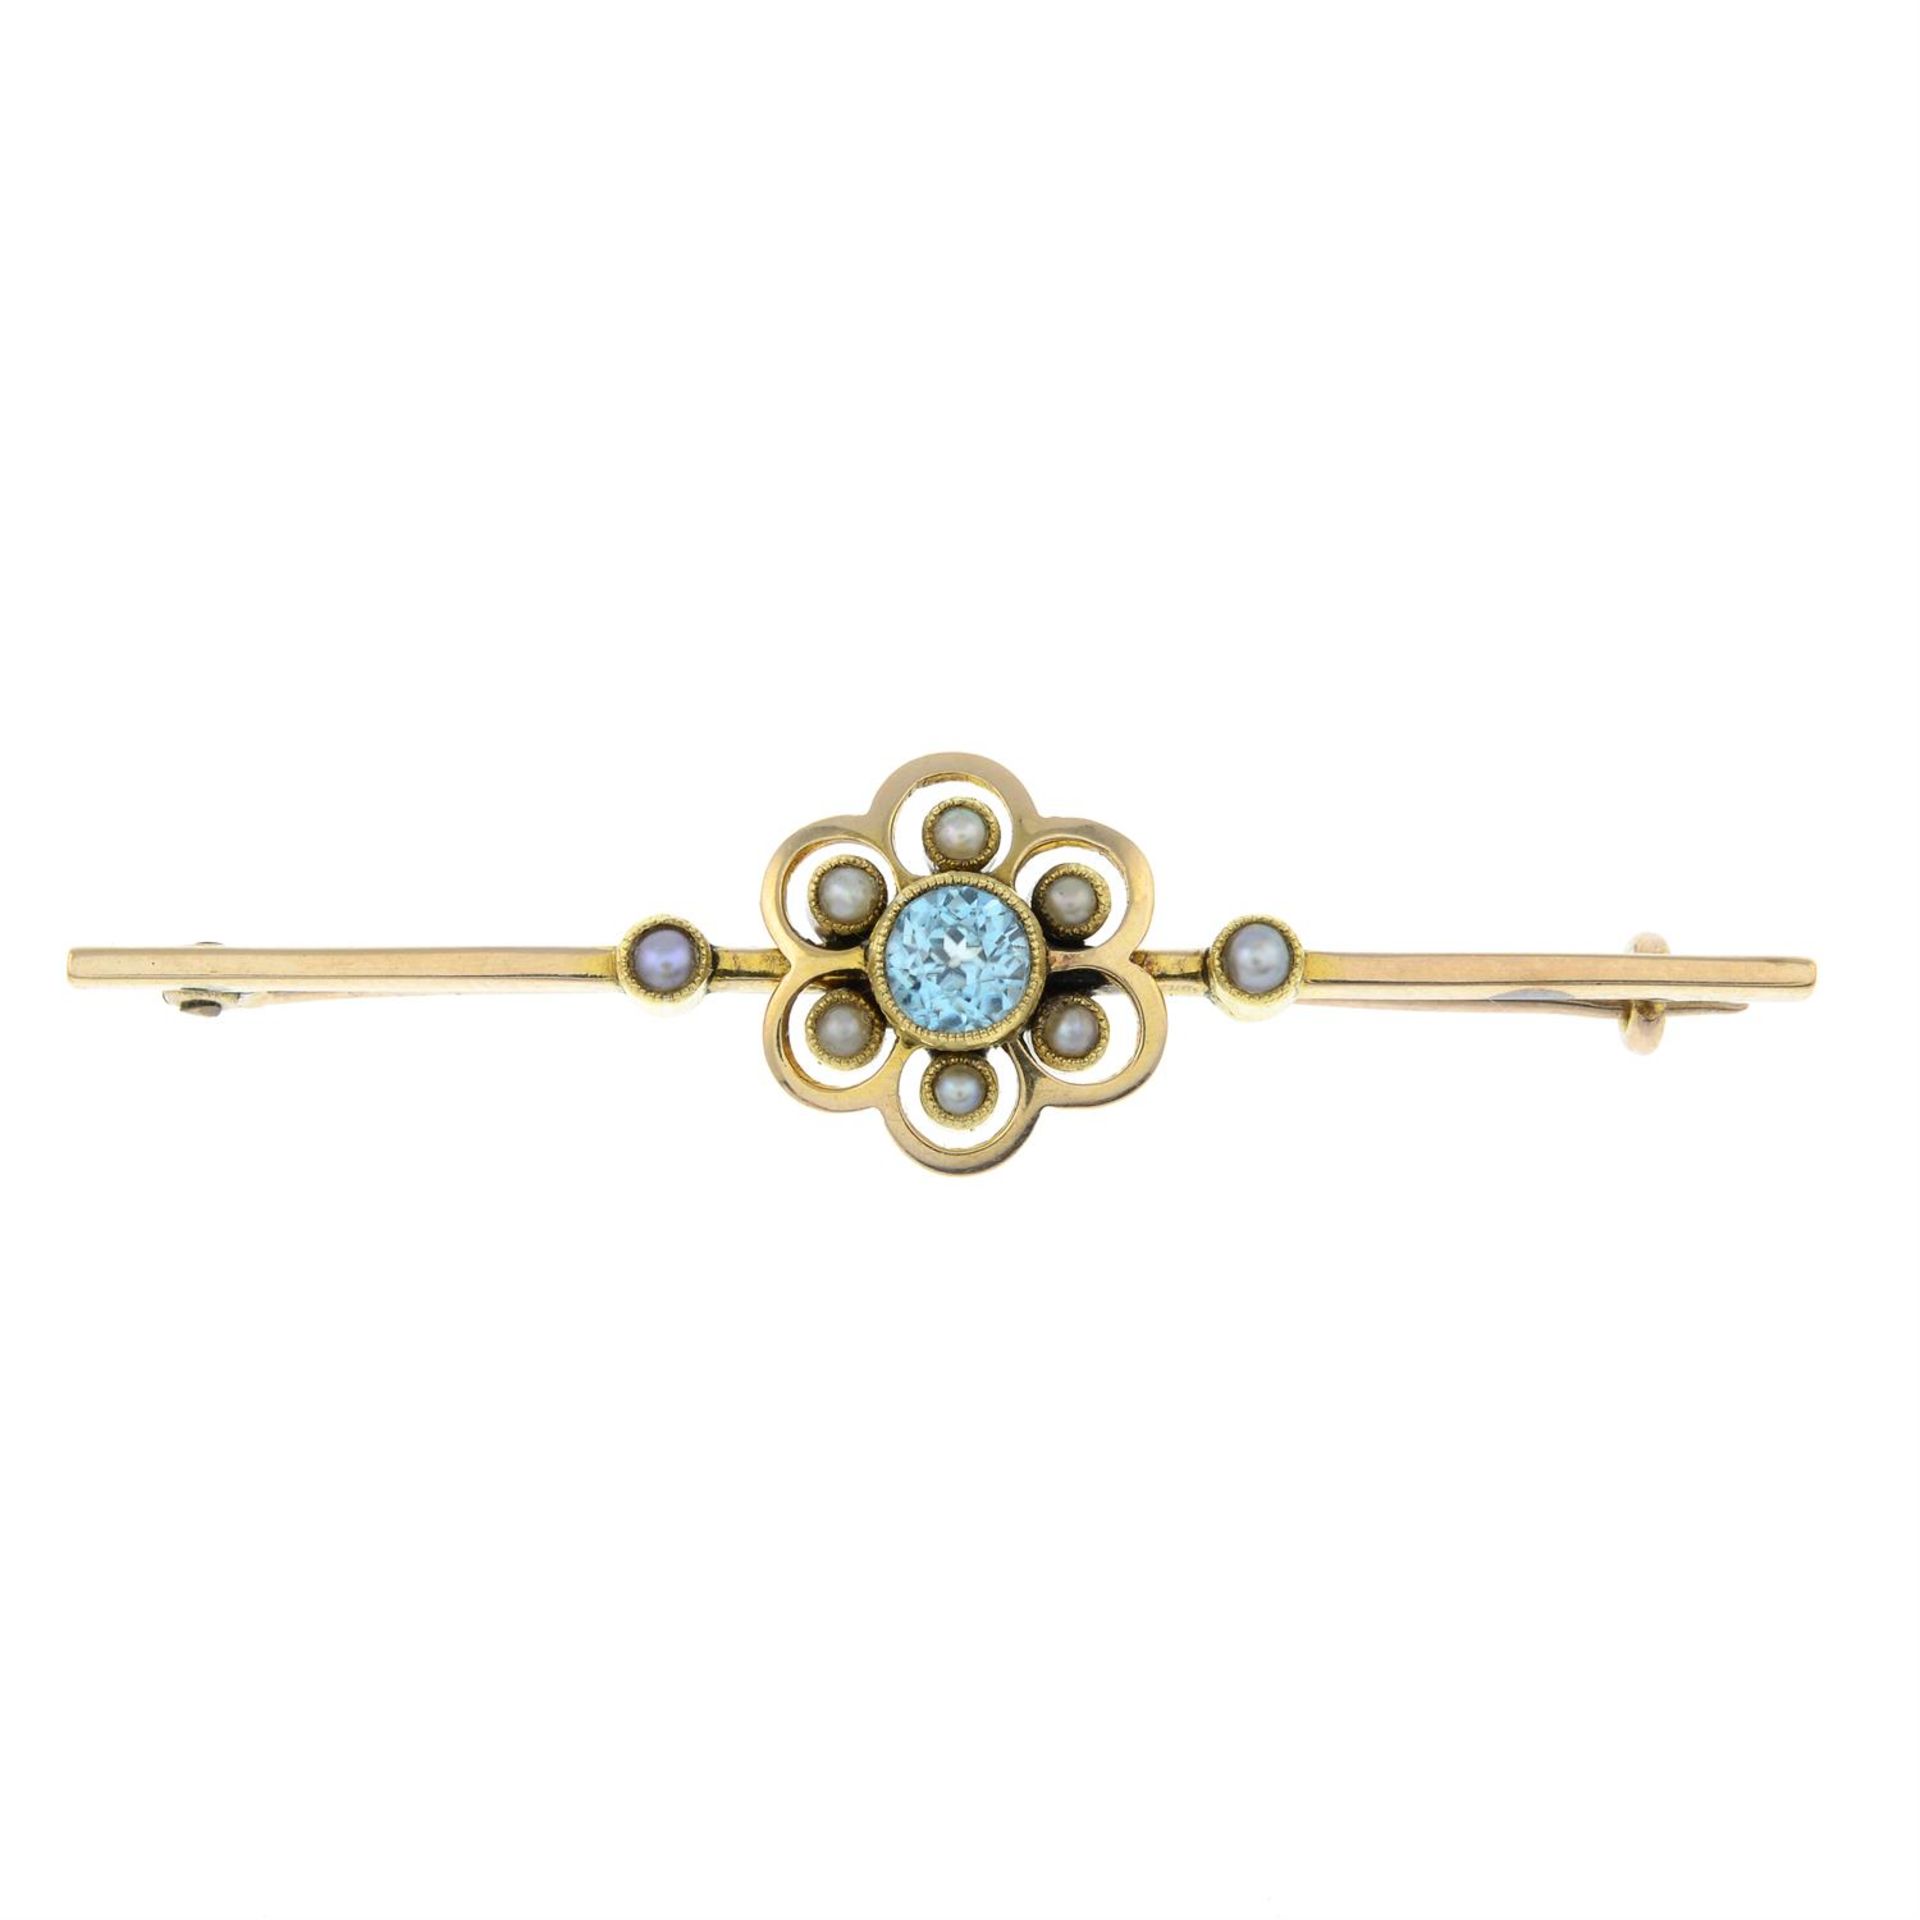 An early 20th century zircon and split pearl bar brooch.